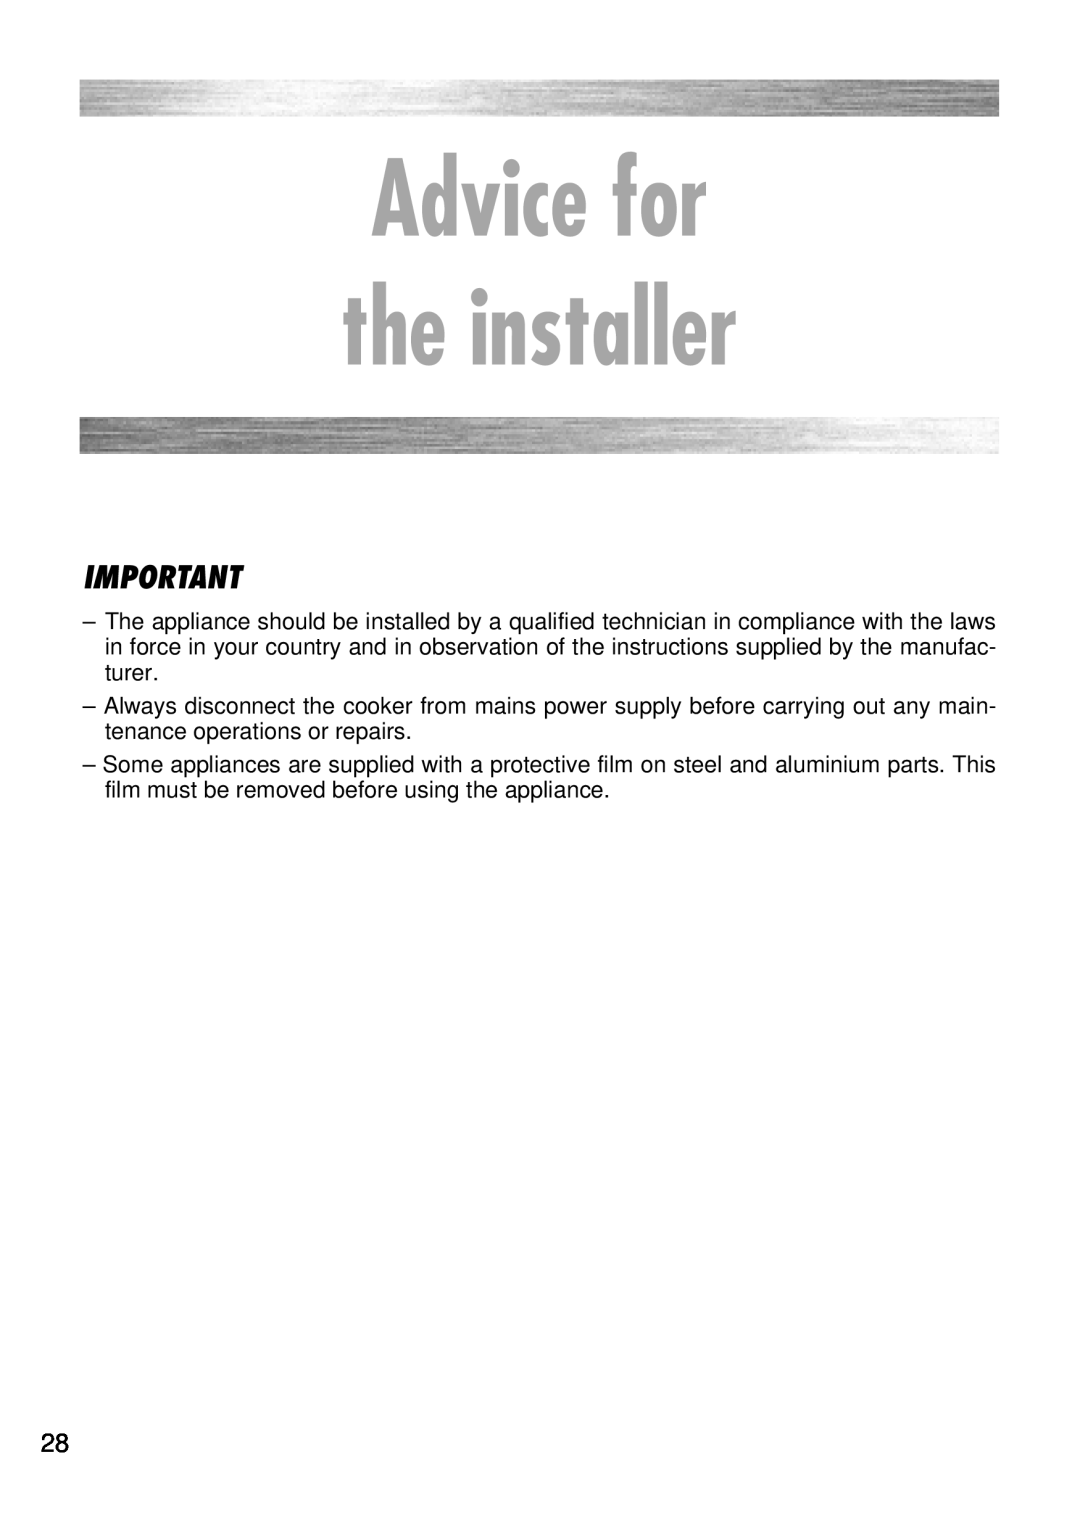 Kenwood CK 680 manual Advice for the installer 